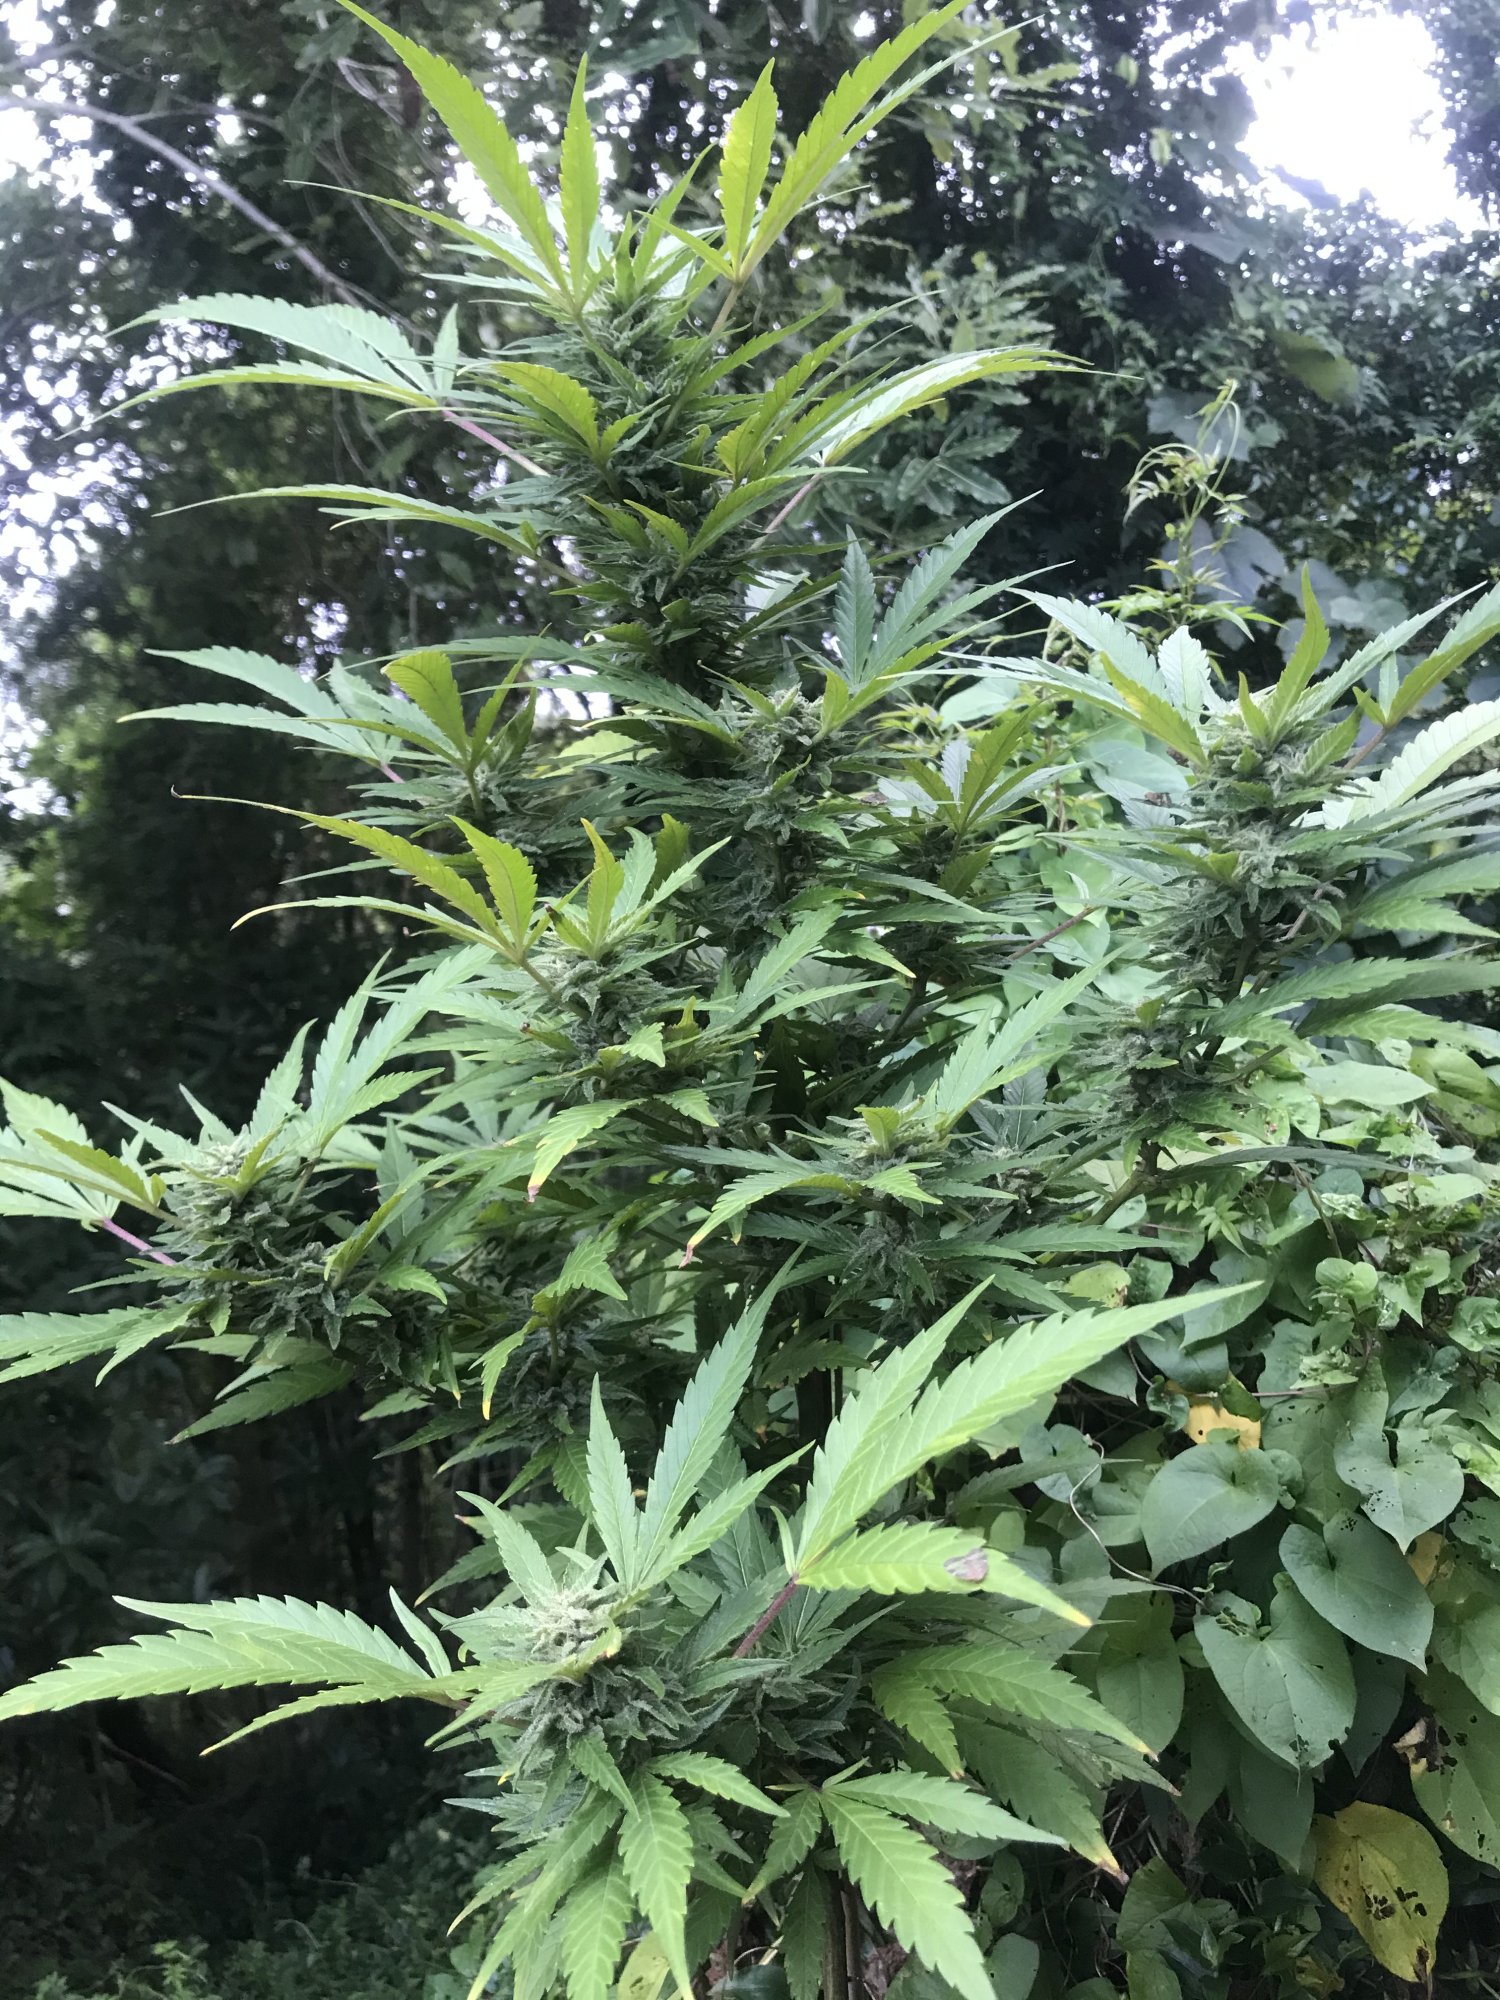 Leaves are yellowing close to harvest 5